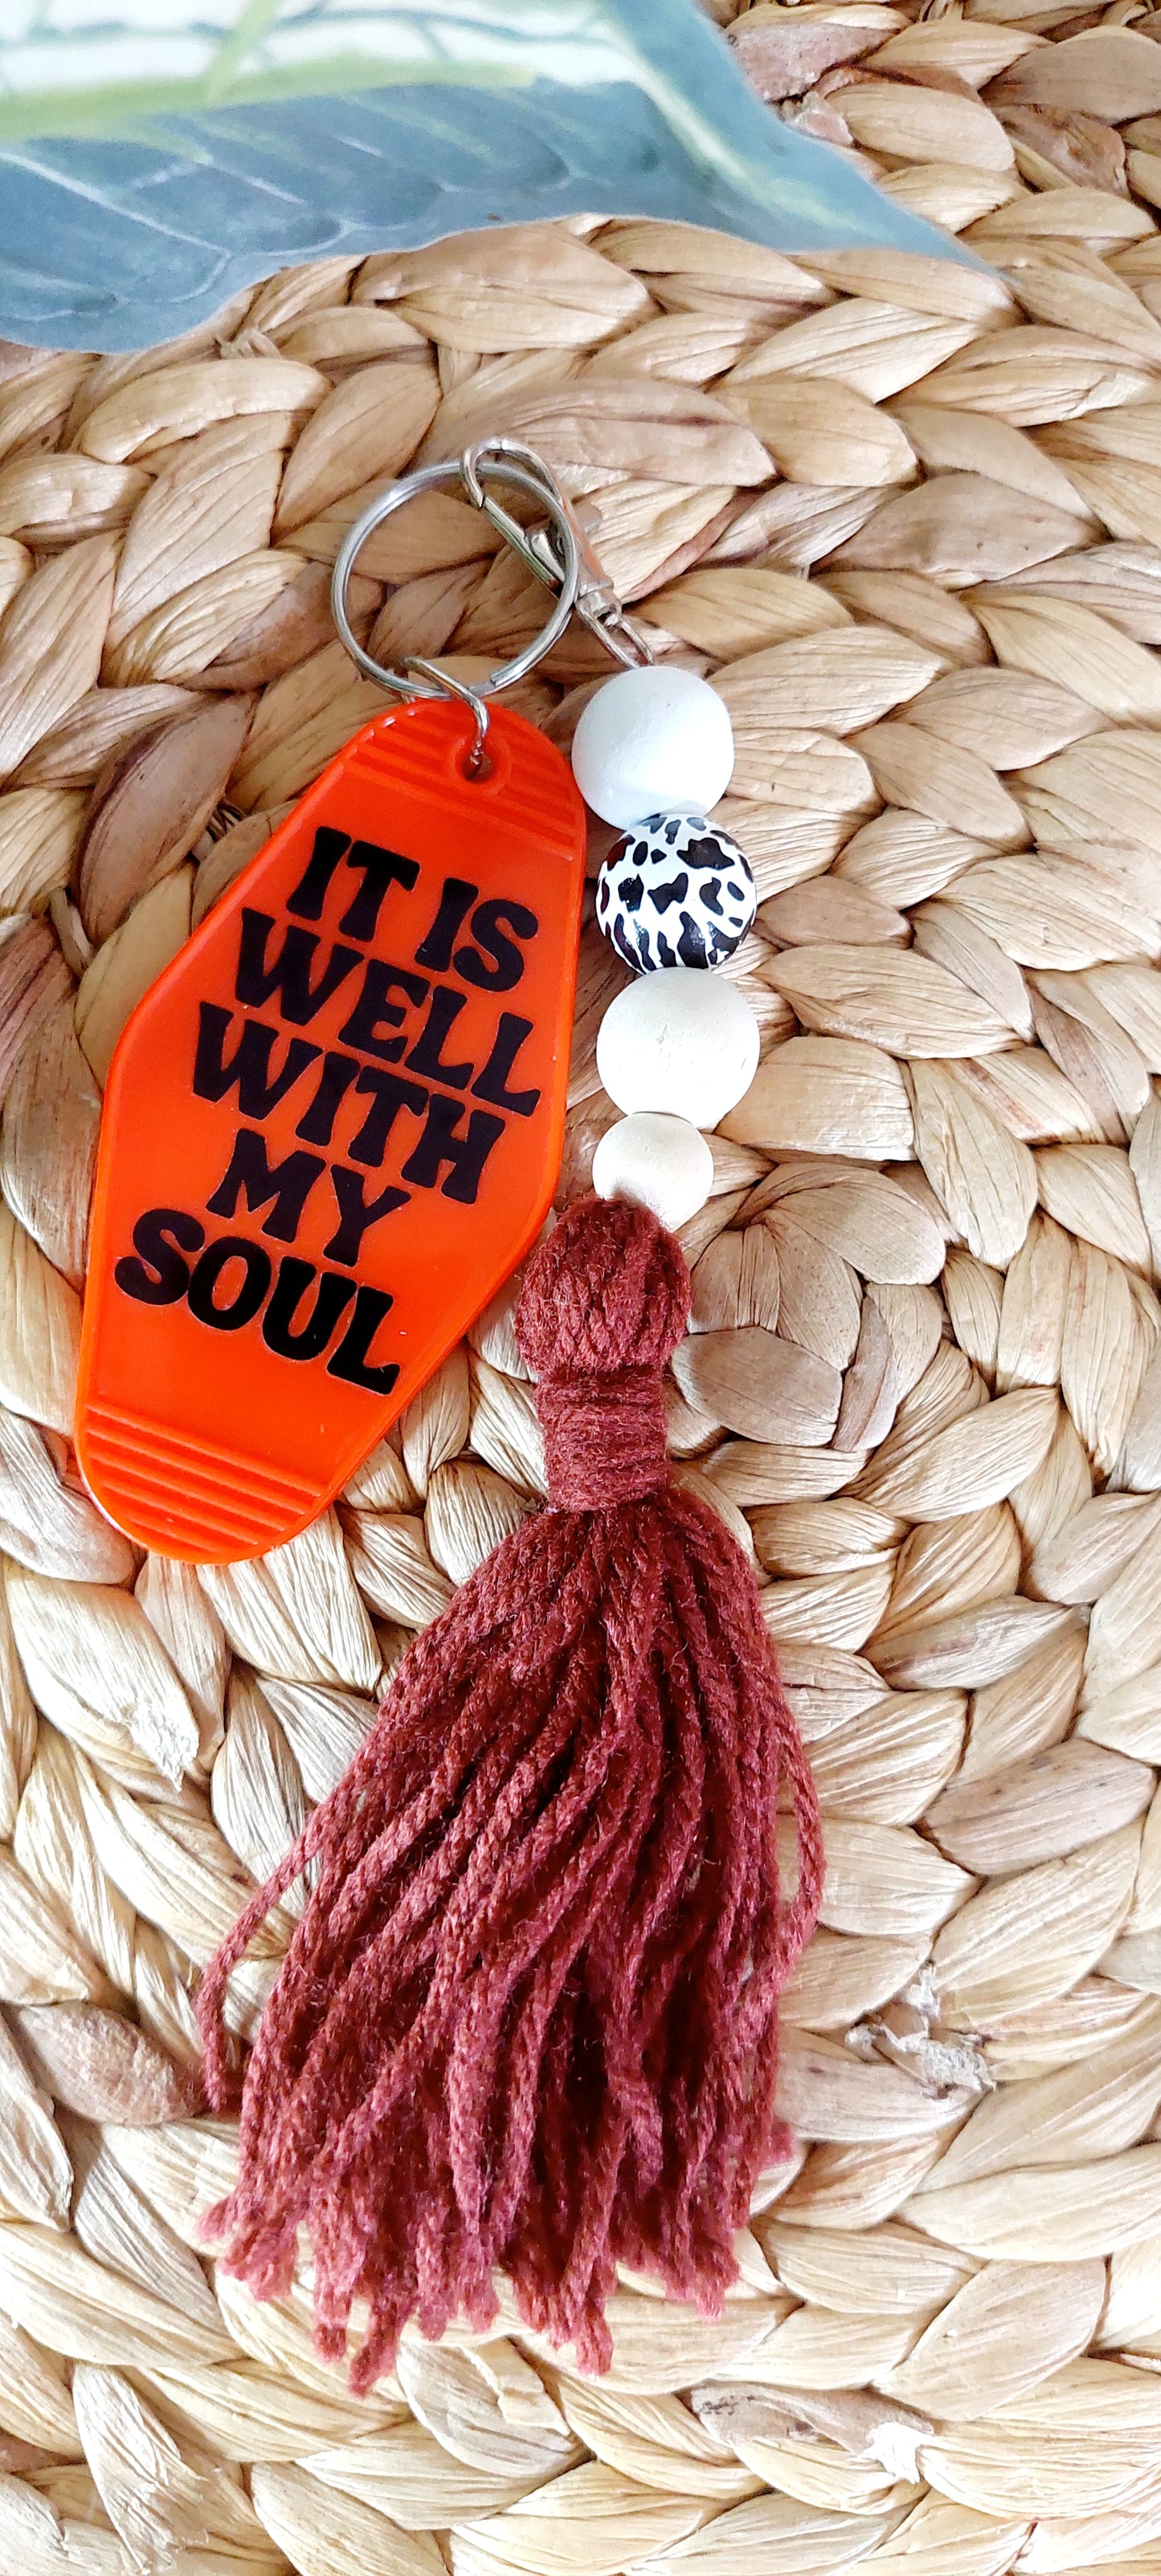 It Is Well With My Soul Keychain